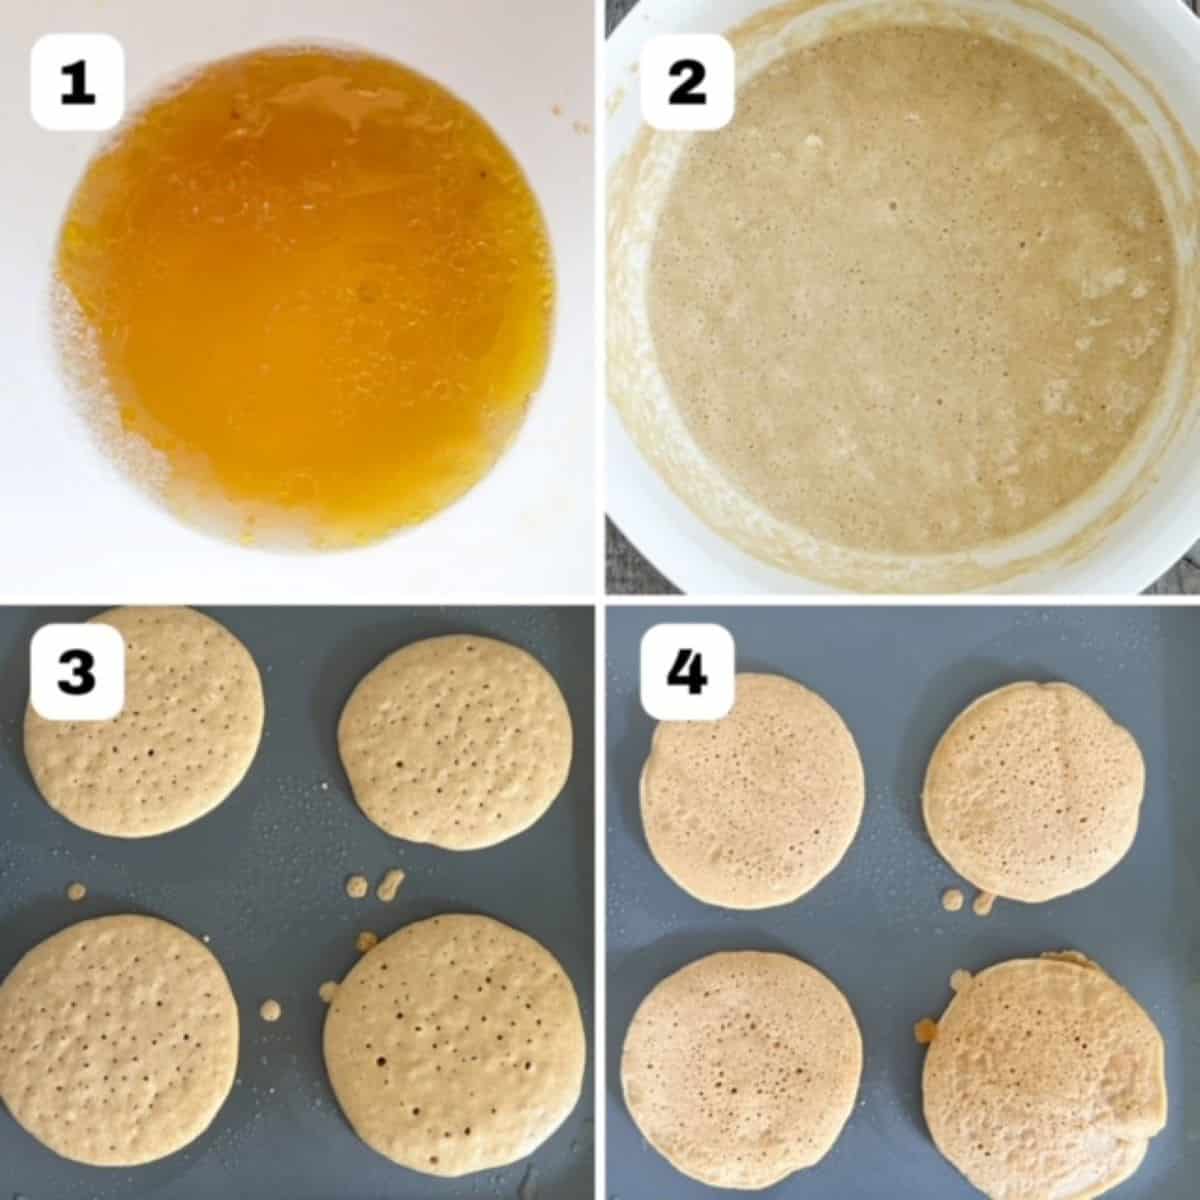 Four process shots showing steps to make 4-inch pancakes.